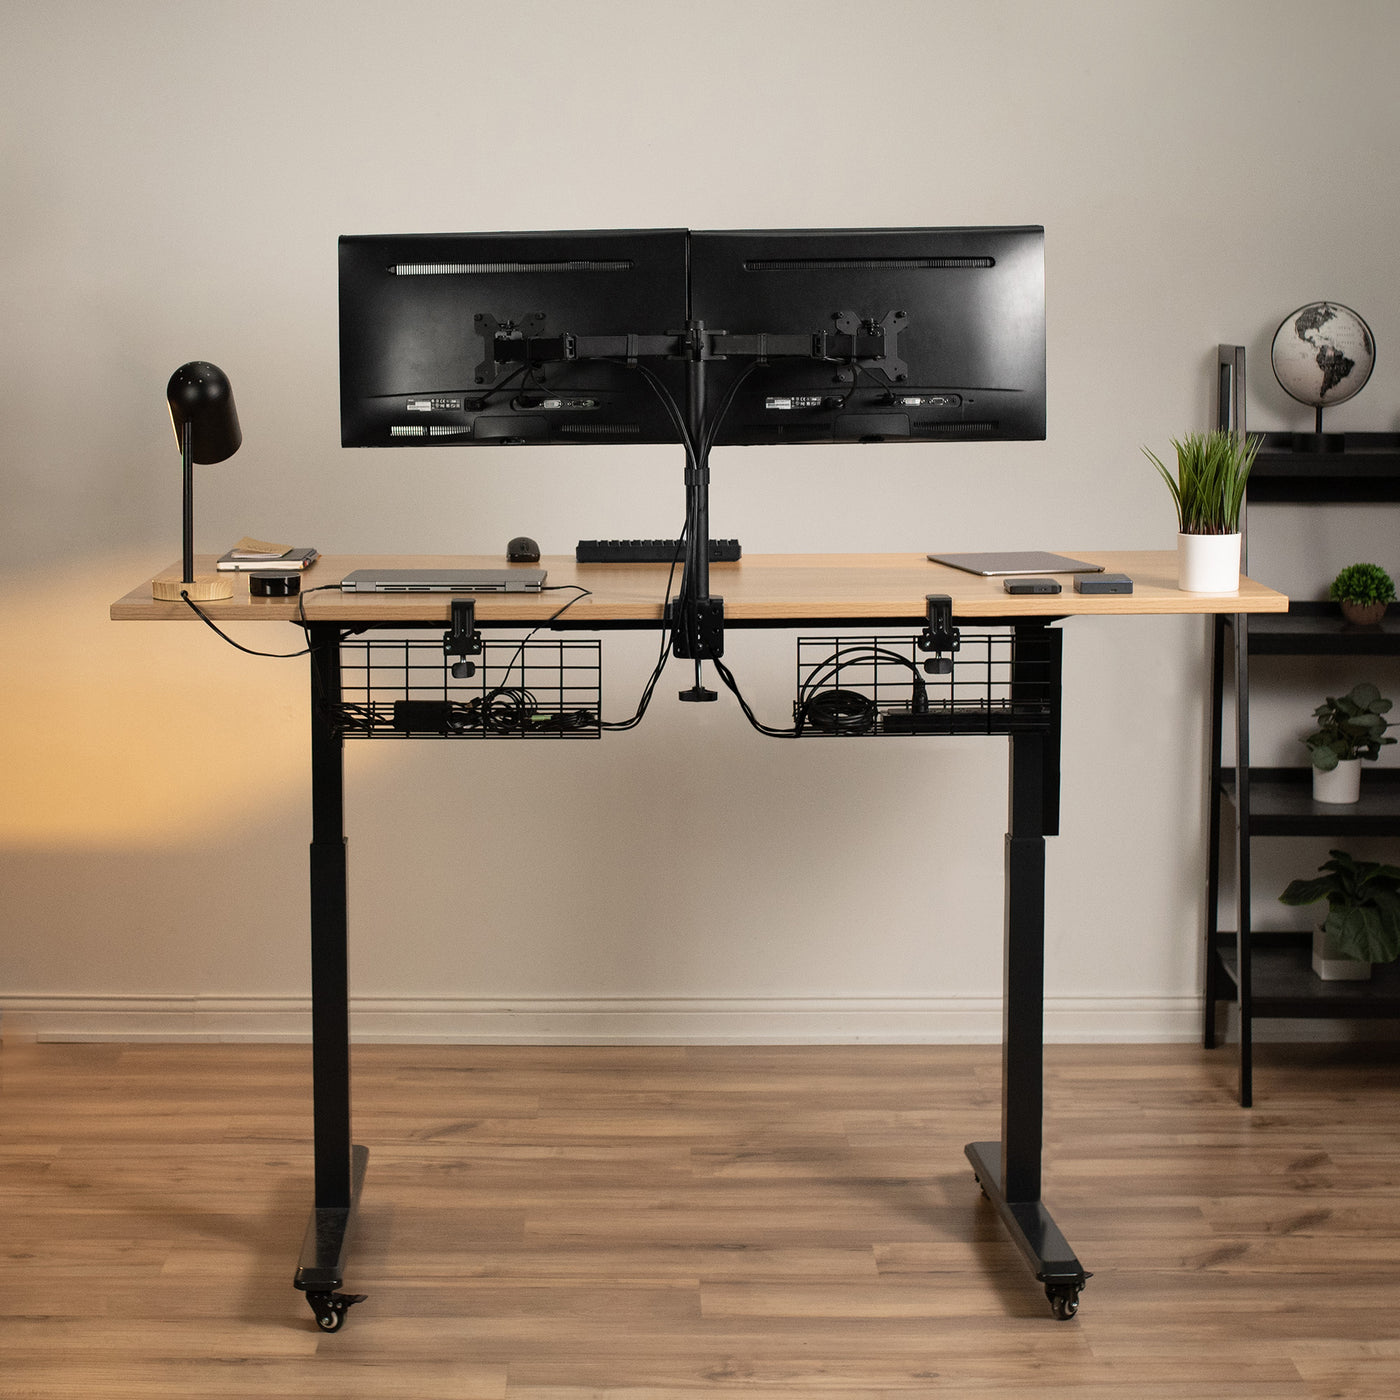 Clamp-on Cable Management Racks